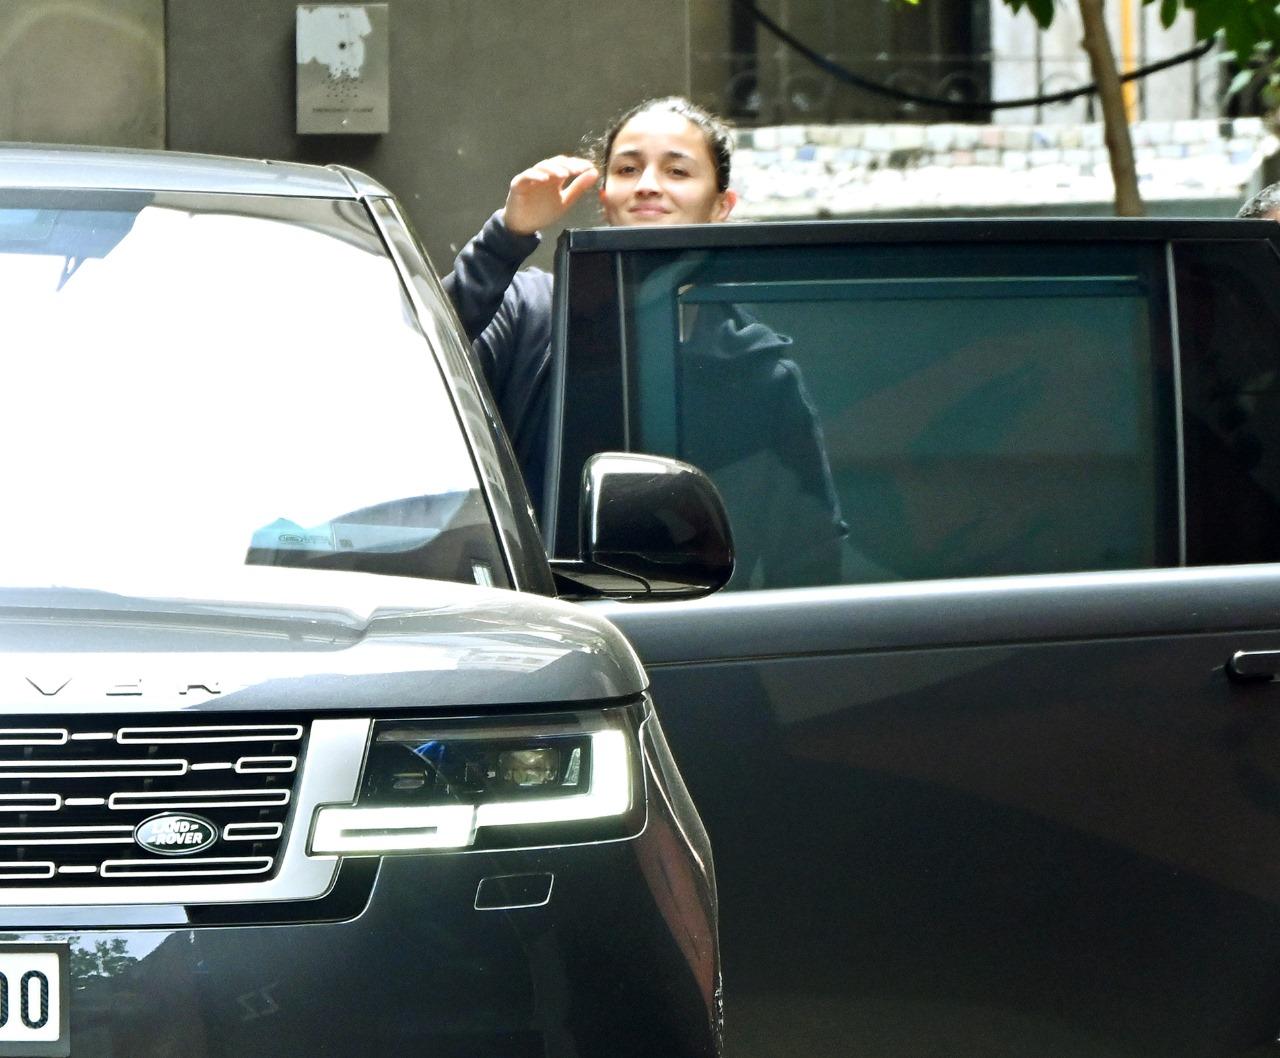 Alia Bhatt waved at the paparazzi as she went out